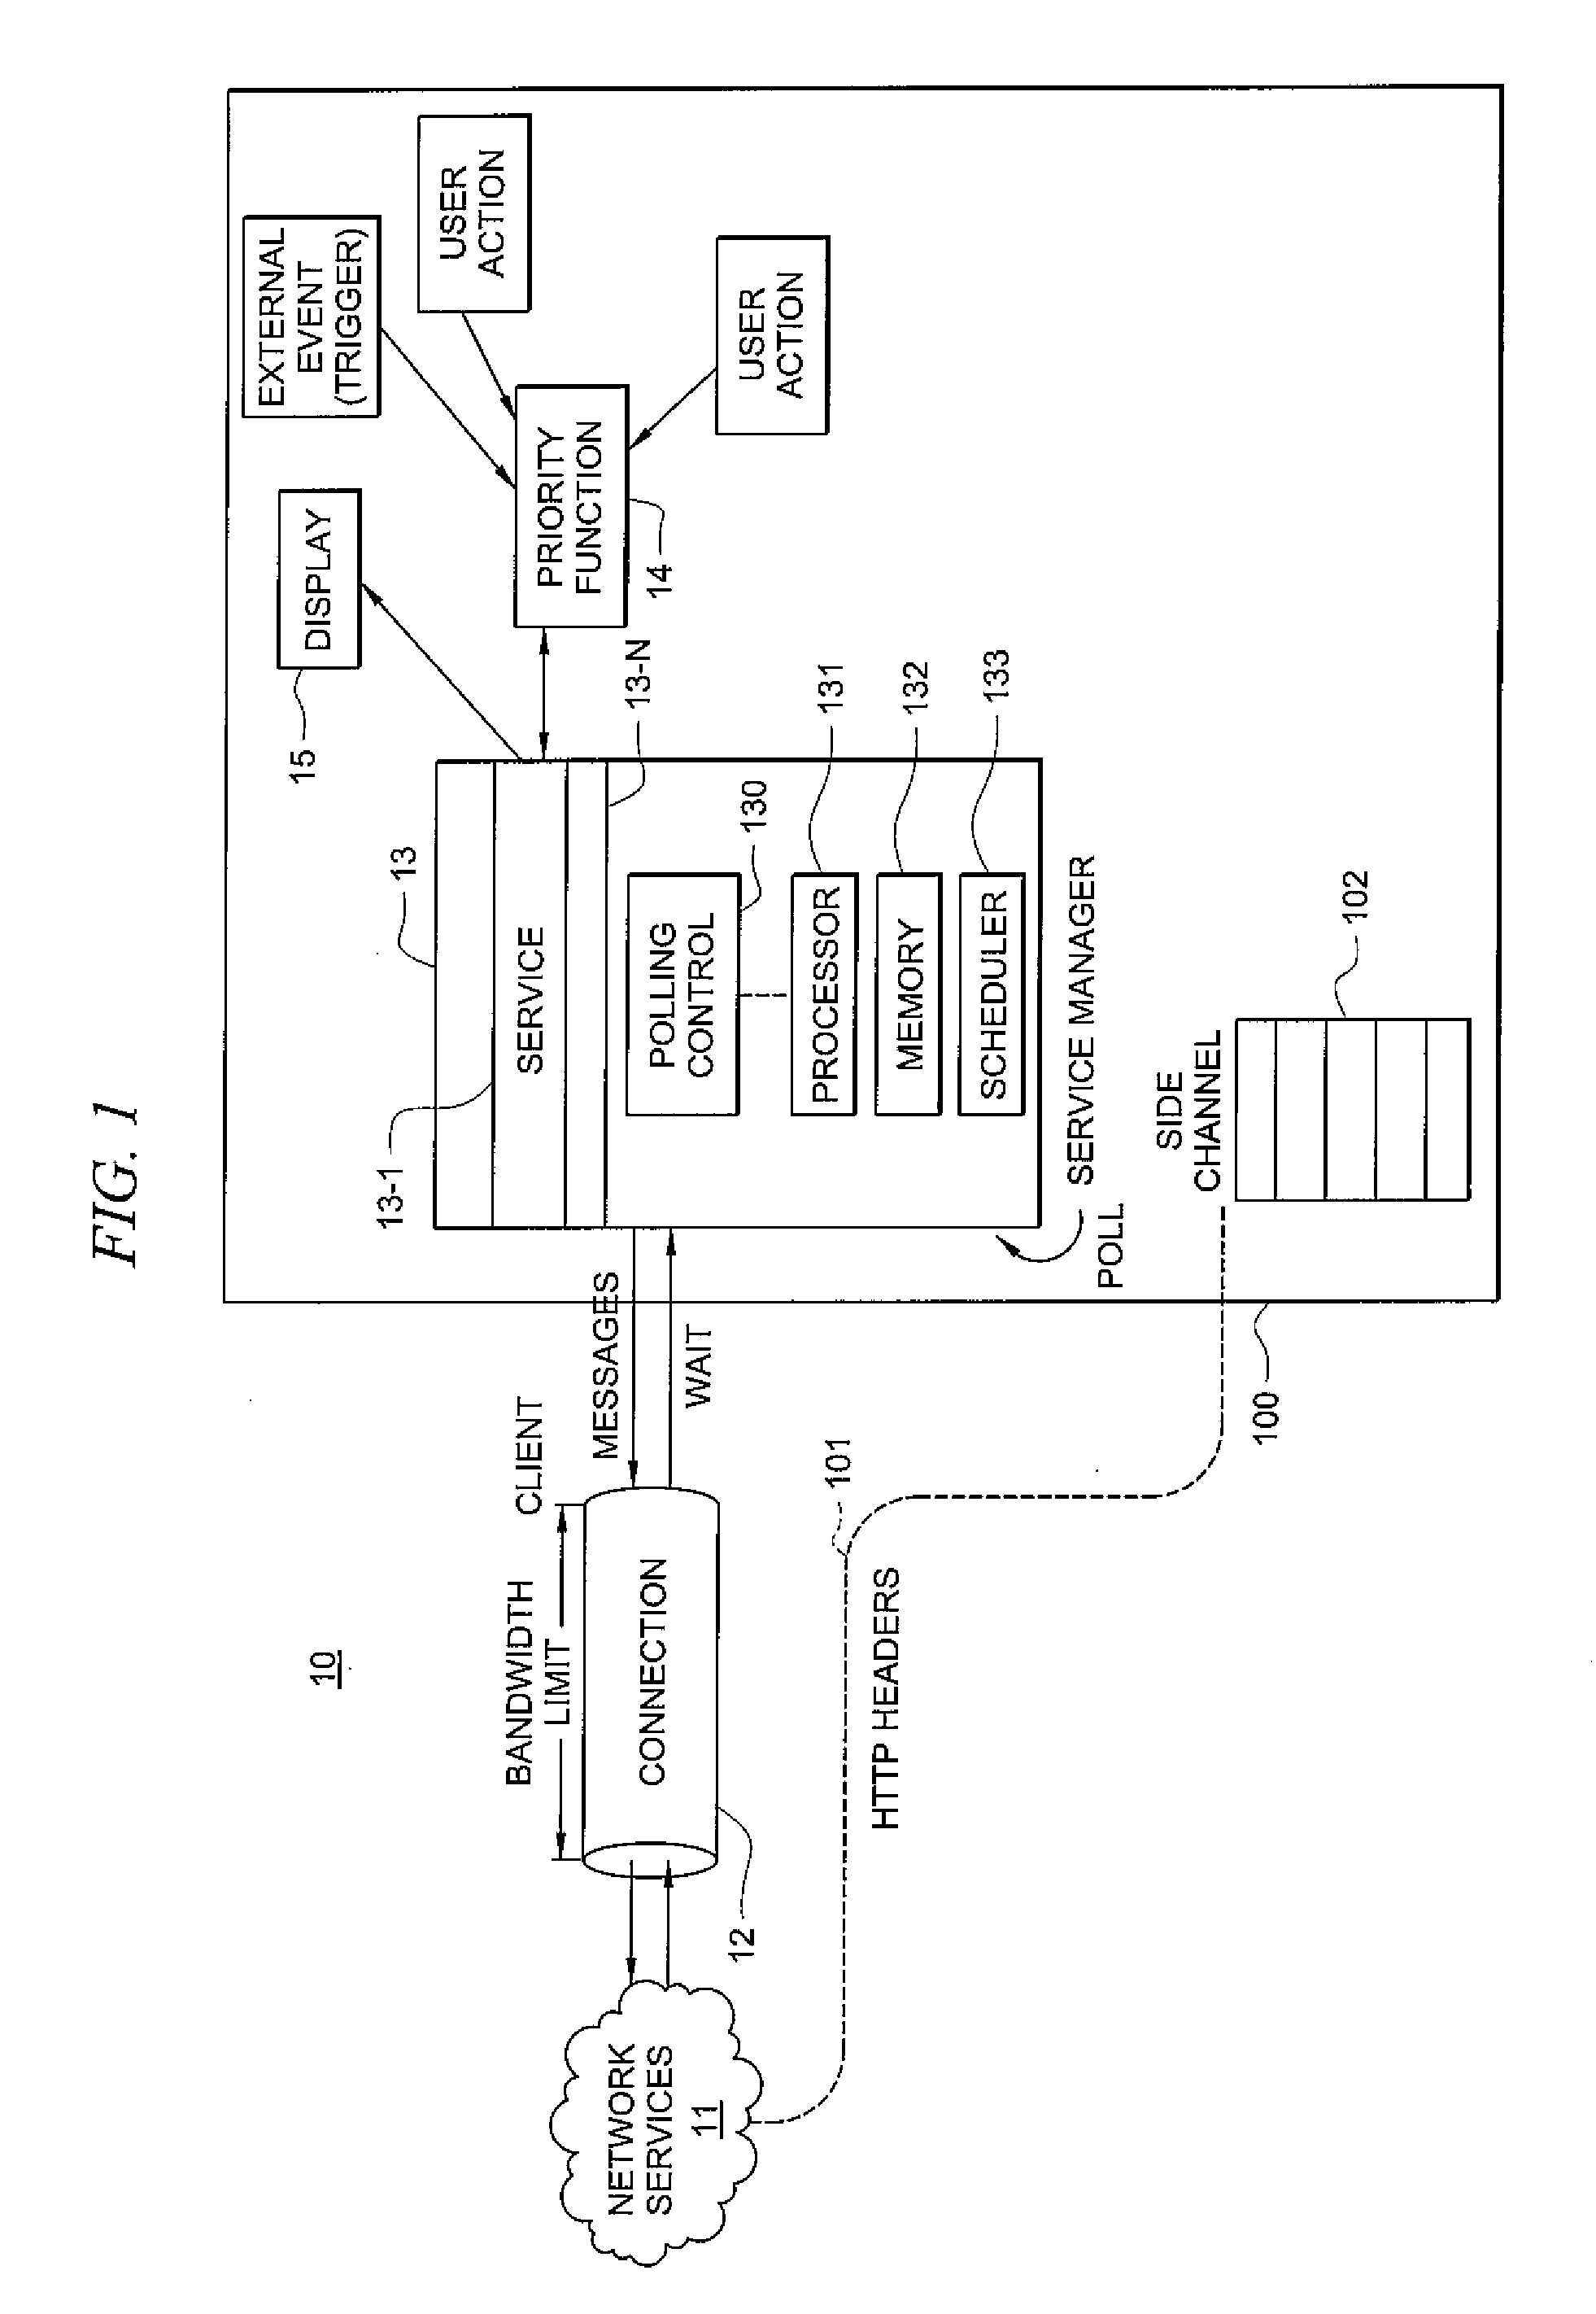 Systems and methods for coordinating the updating of applications on a computing device